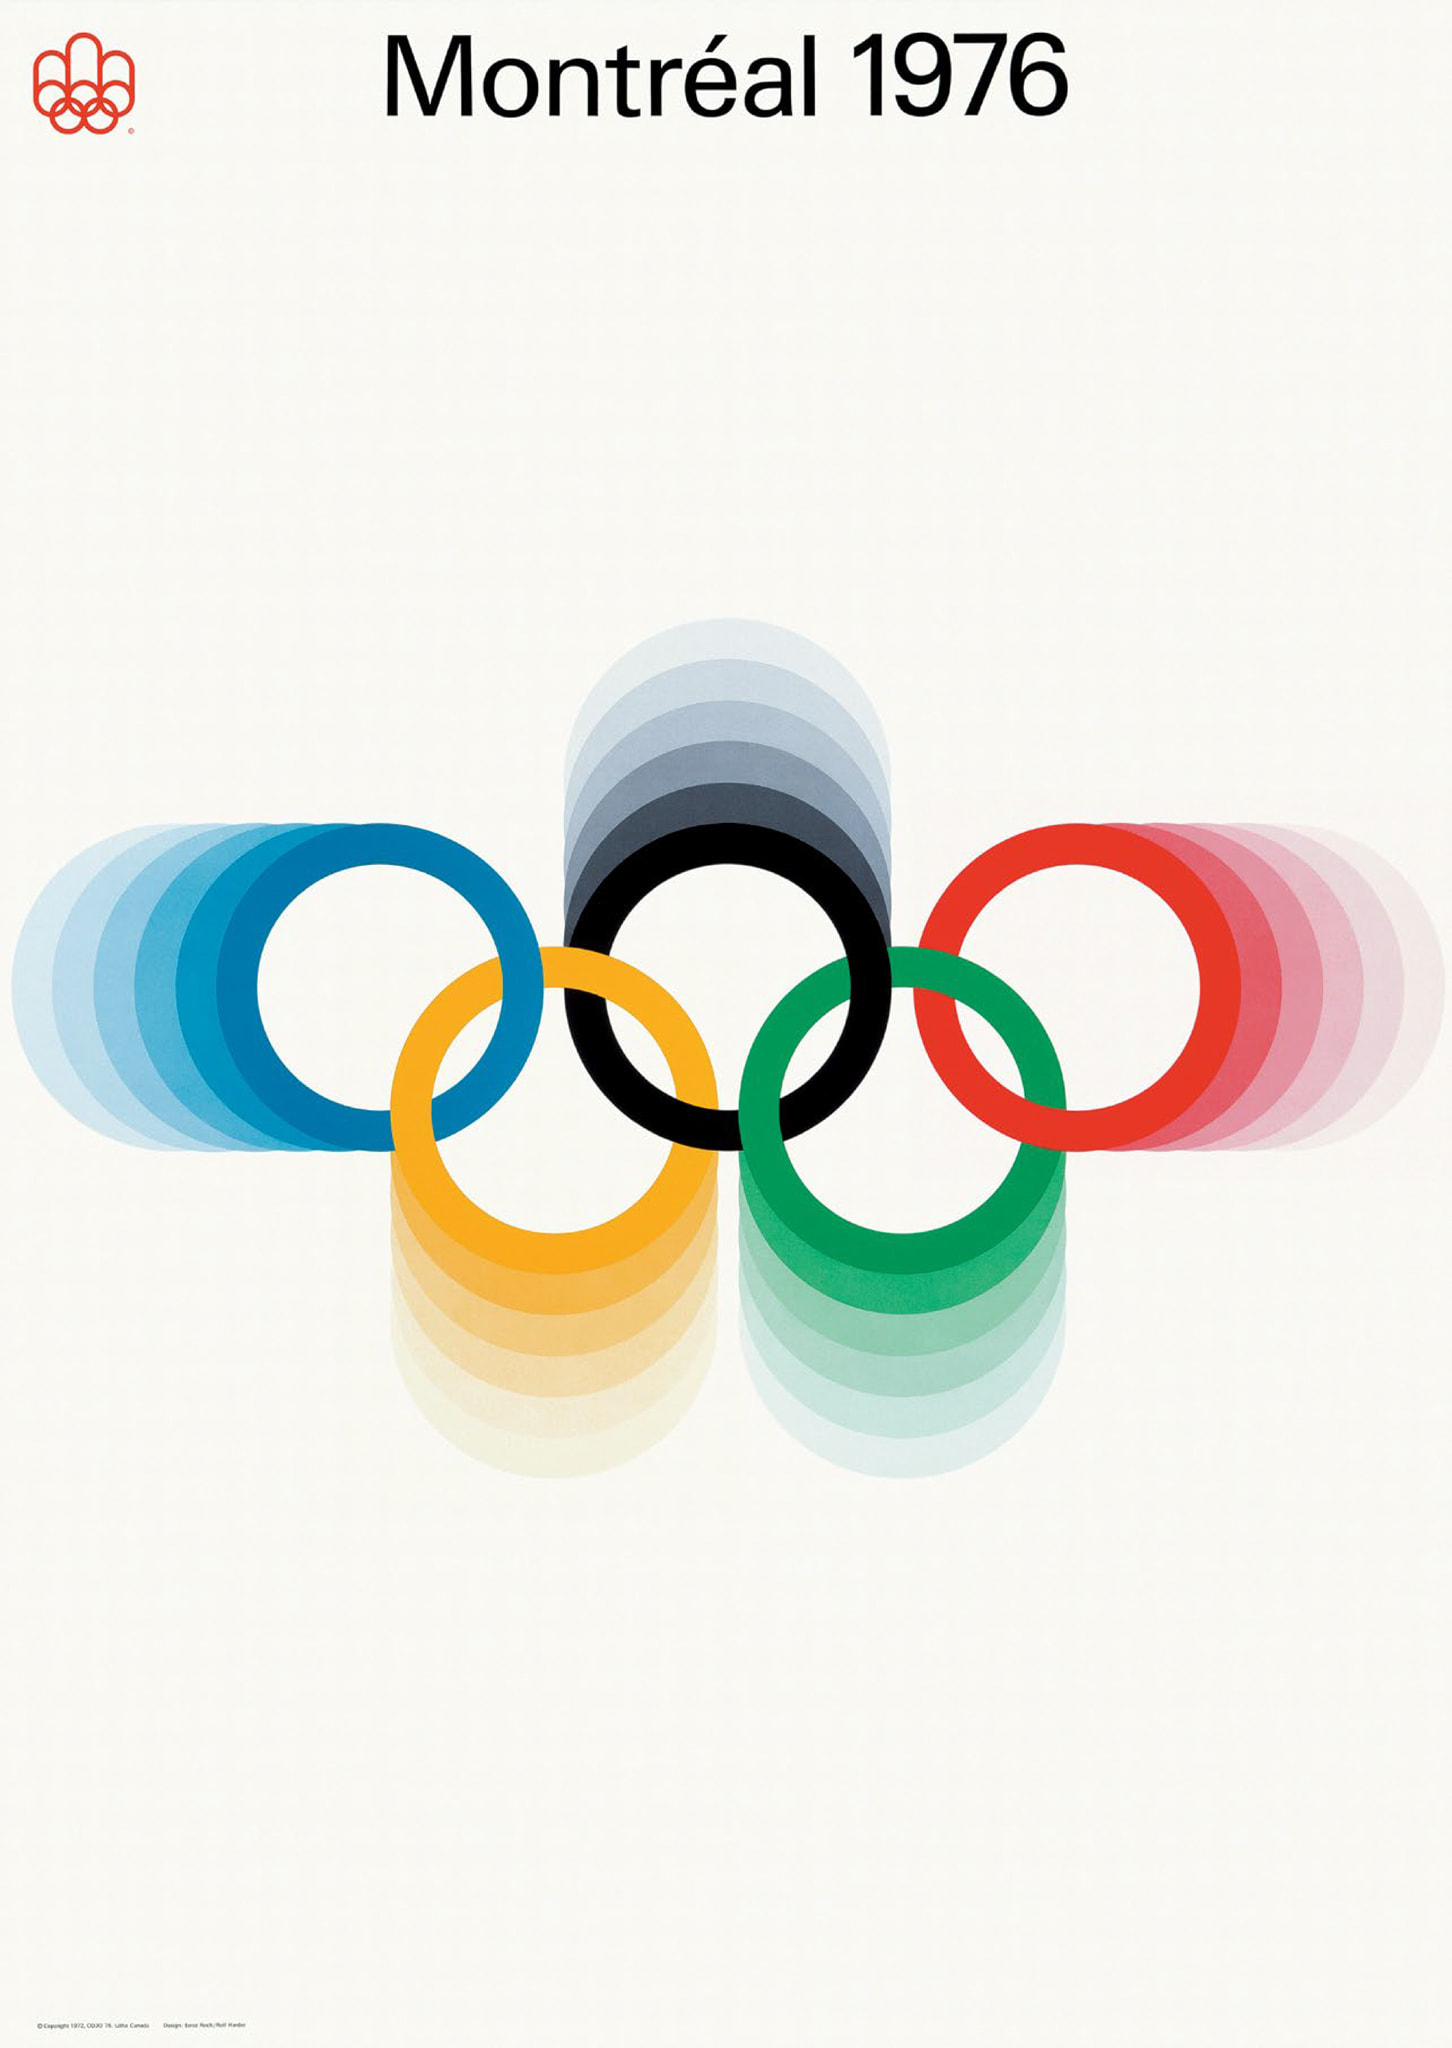 Montreal 1976 Olympic logo, poster design & look of the games